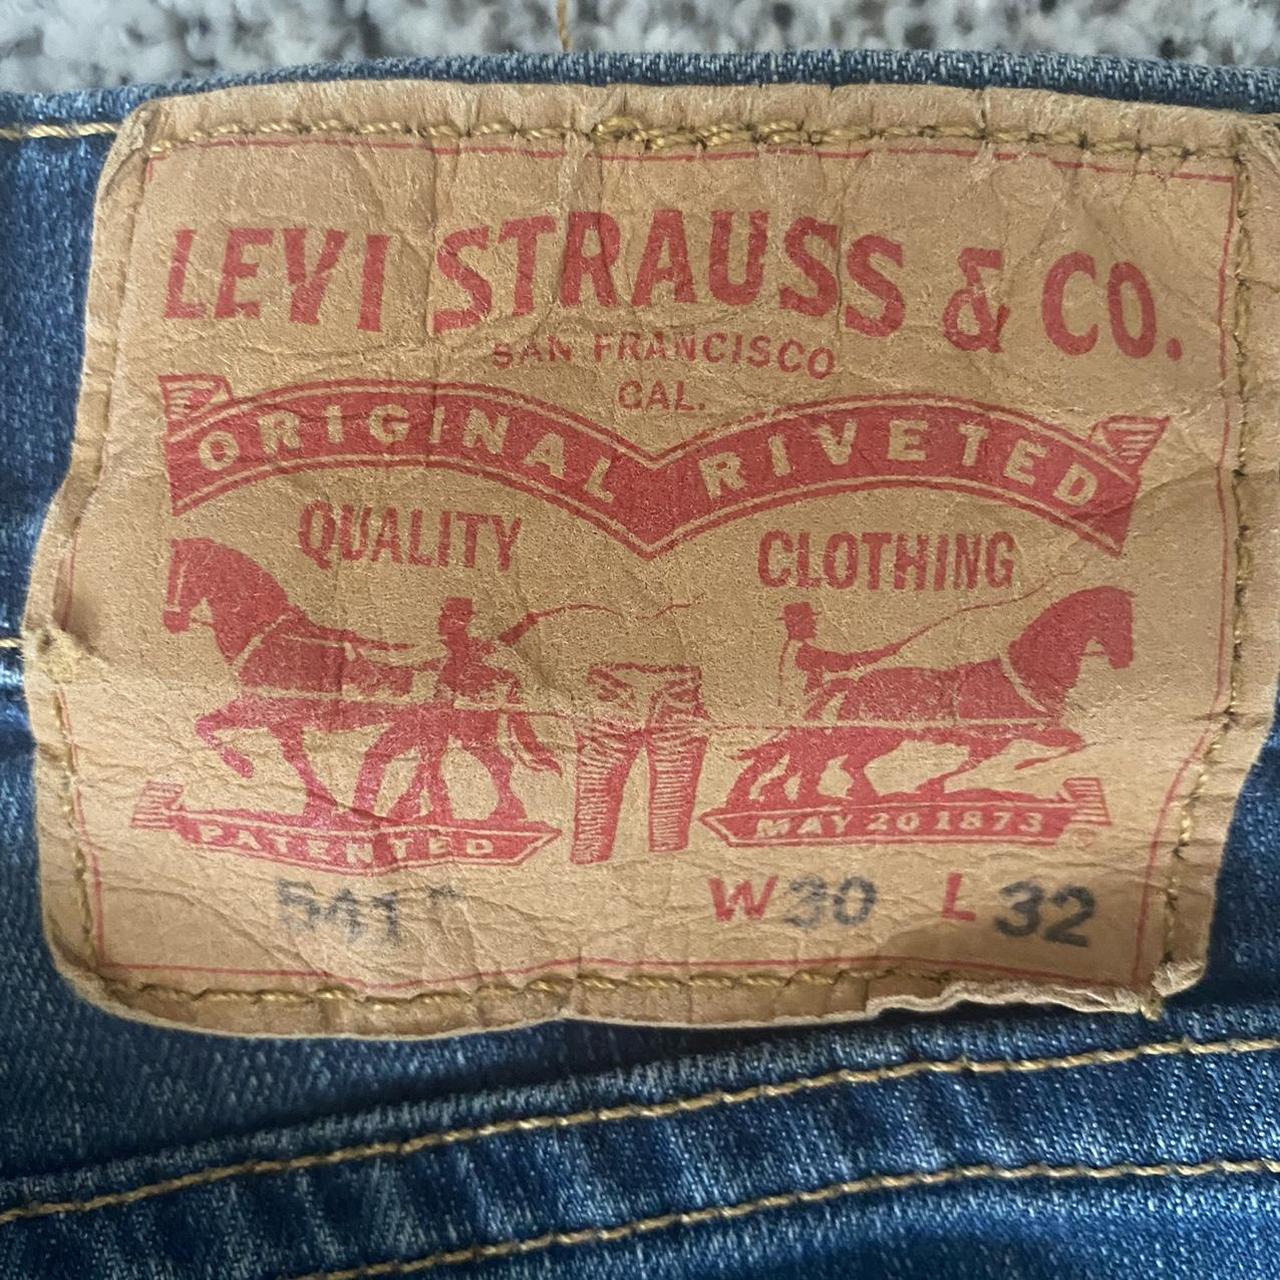 Levis 541 Jeans. Waterless tag which means you can... - Depop